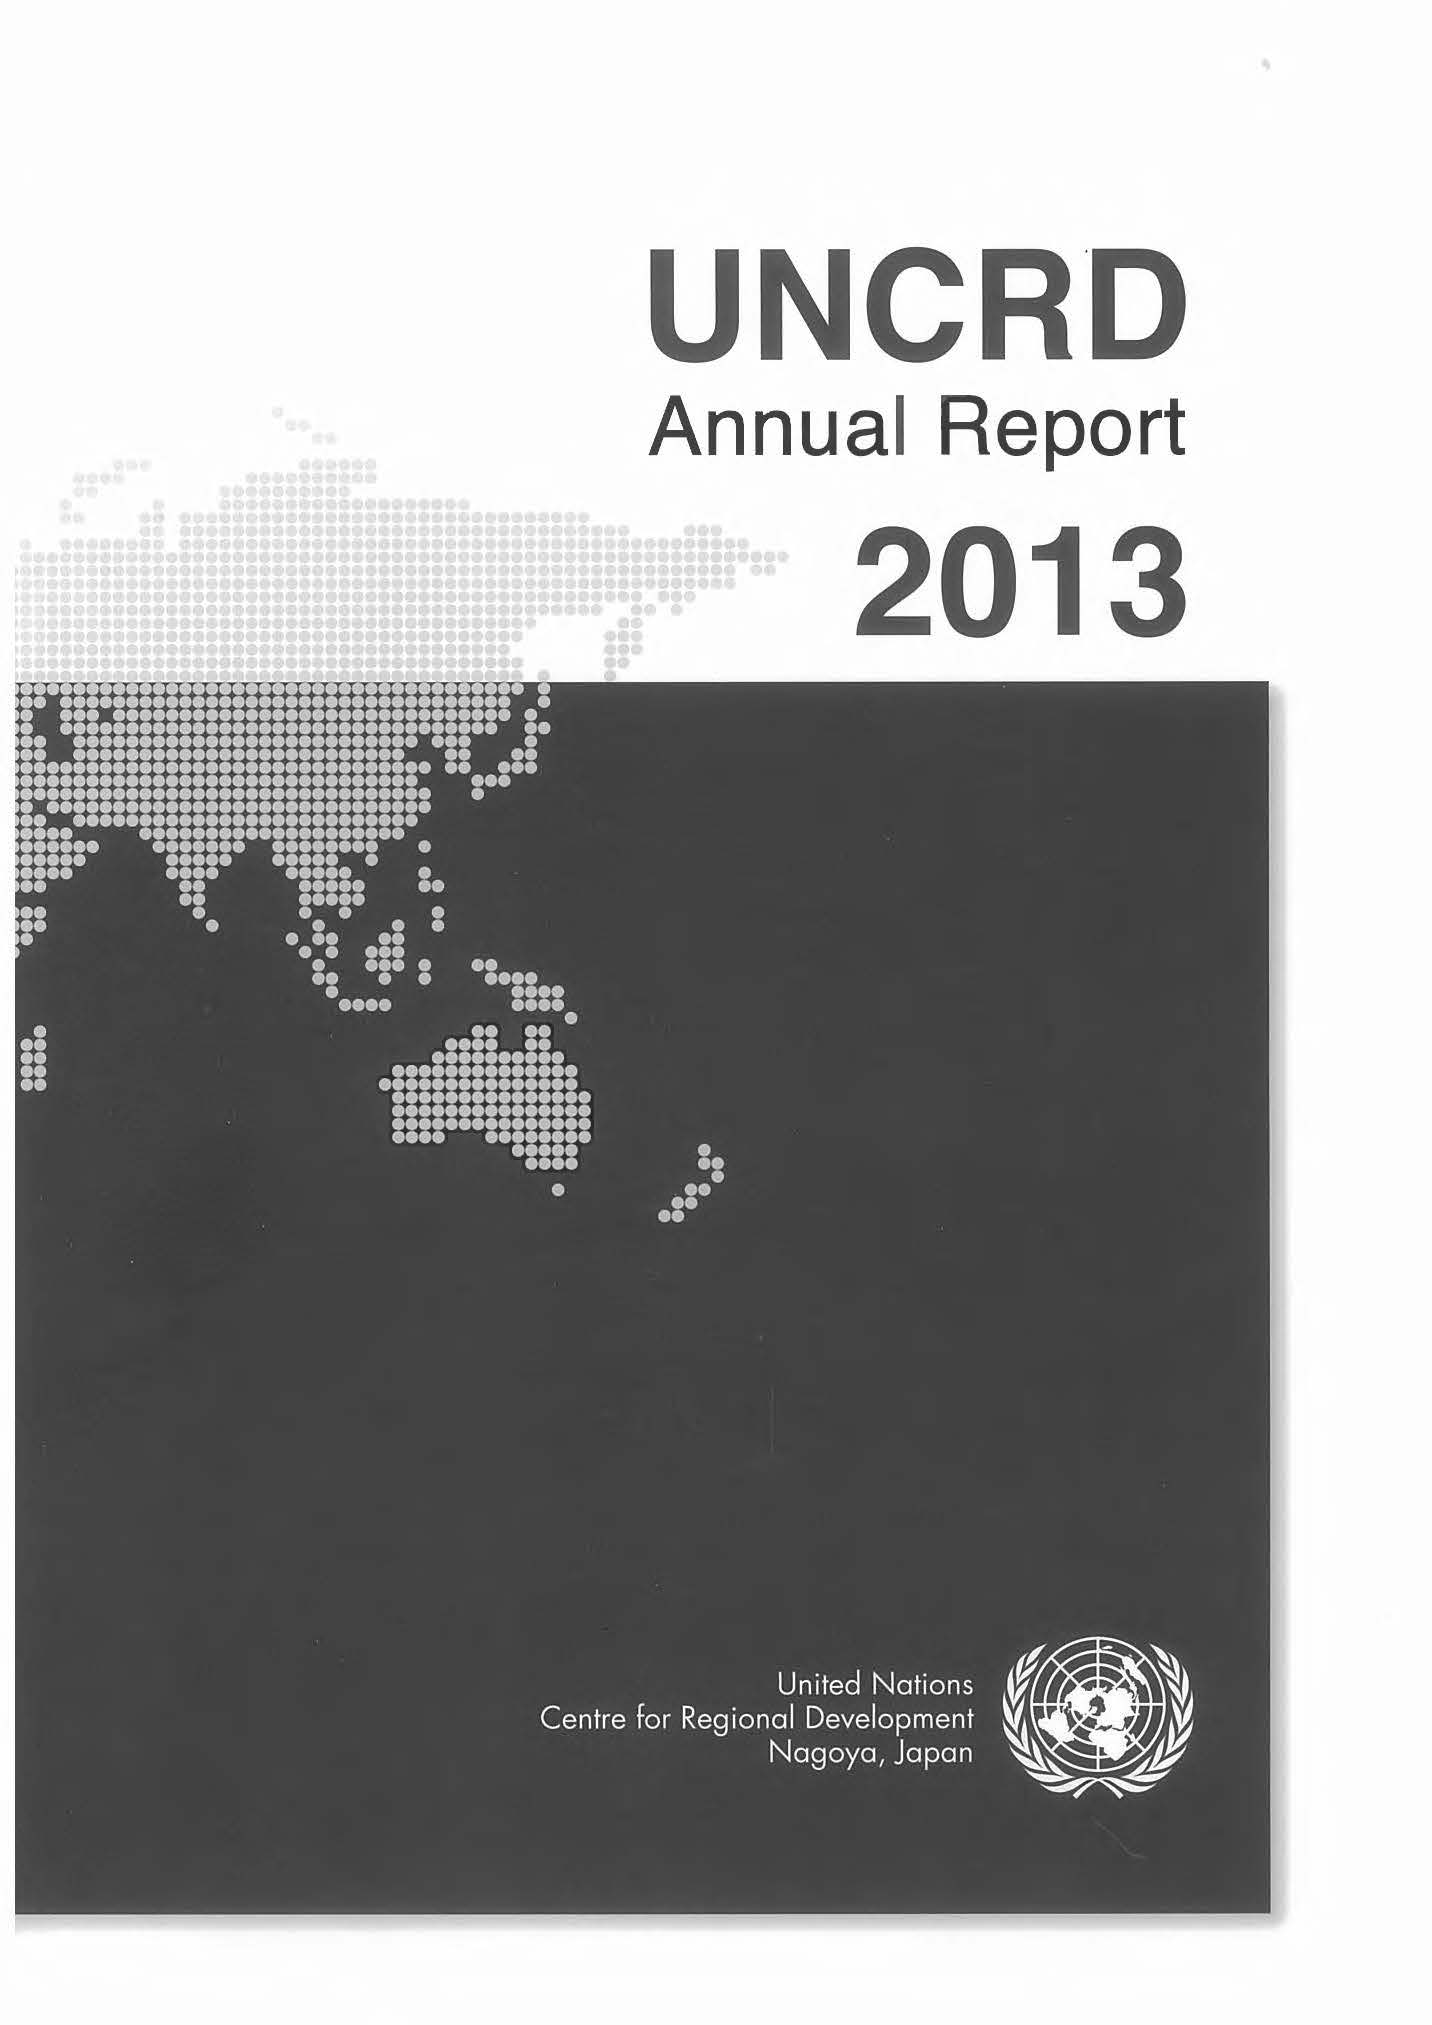 Cover of the UNCRD Annual Report 2013